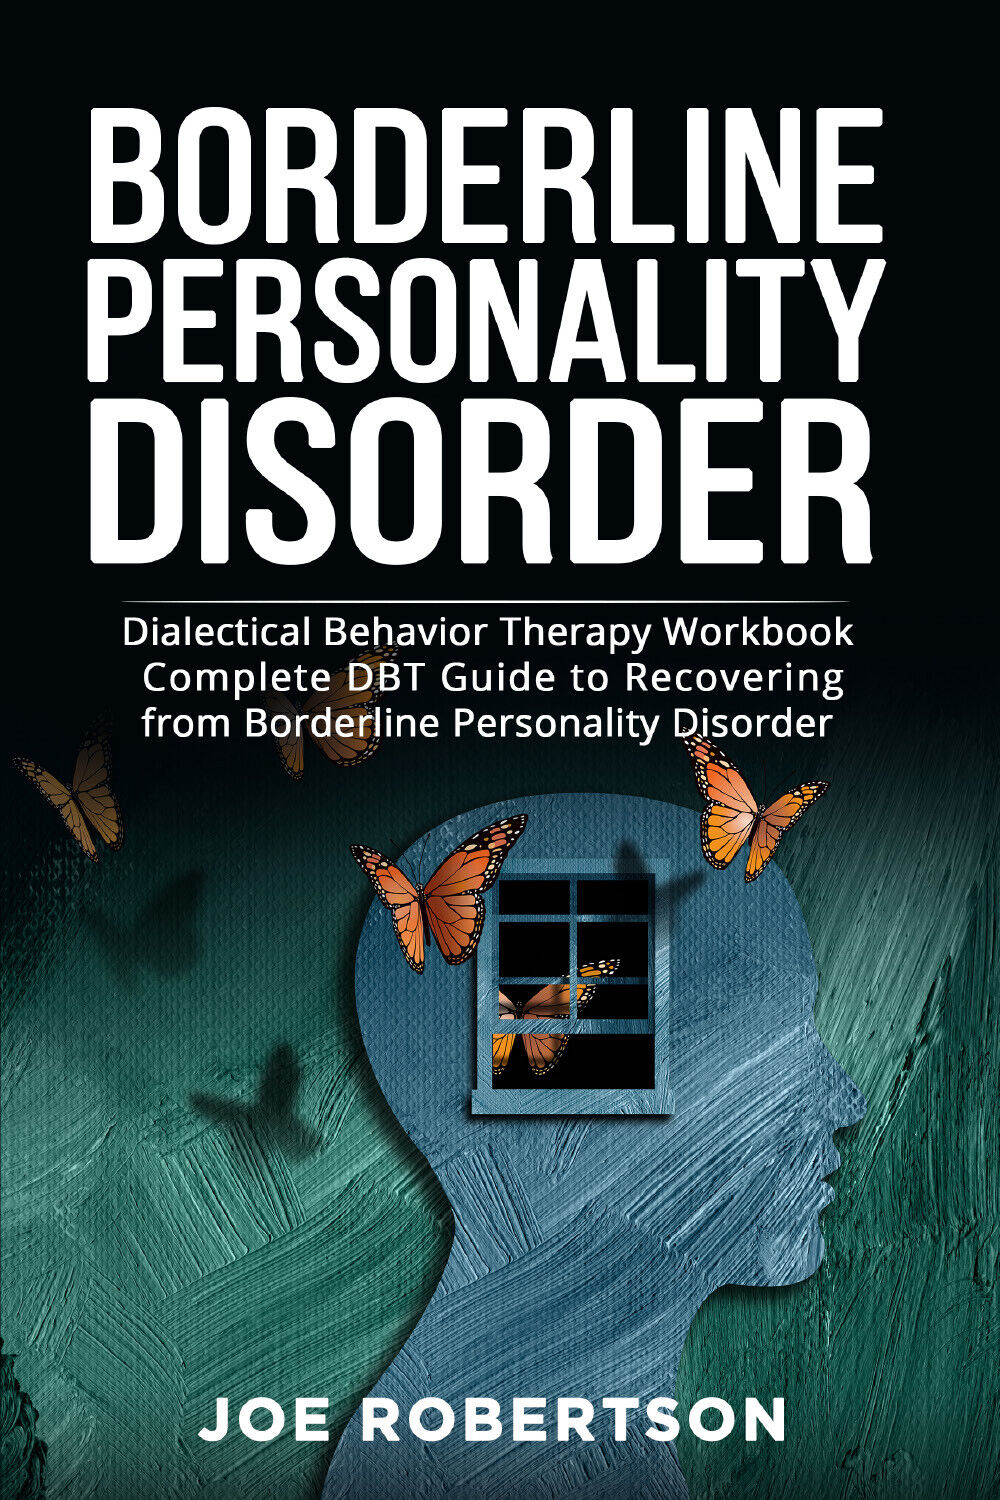 Borderline Personality Disorder. Dialectical Behavior Therapy Workbook, Complete